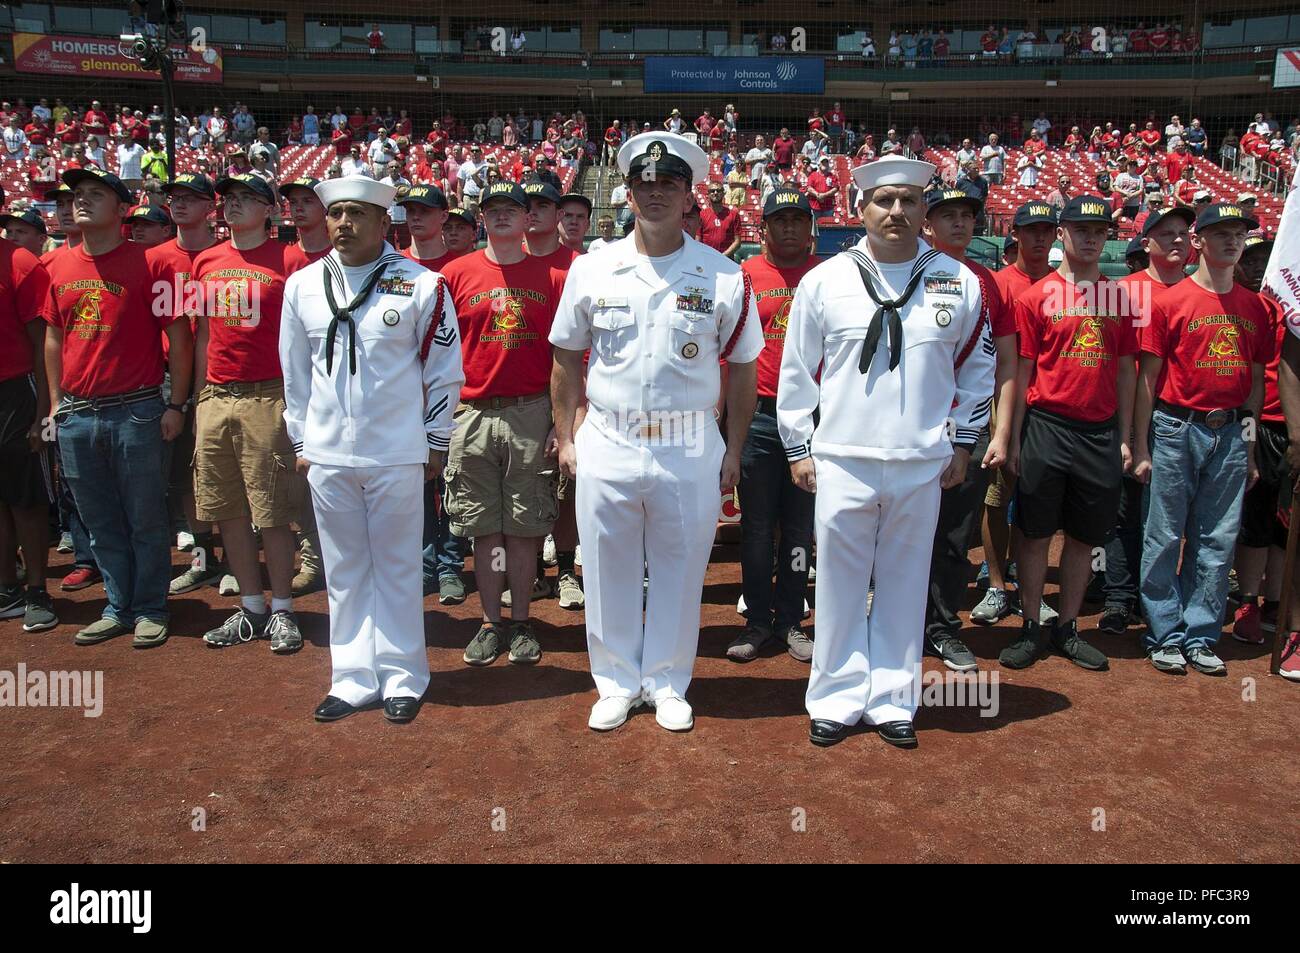 ST. LOUIS (June 7, 2018) – Recruit Division Commanders and recruits assigned to the 60th Cardinal Division stand at attention during a pre-game event at Busch Stadium. The 80 recruits were sworn into the Navy prior to a baseball game between the St. Louis Cardinals and Miami Marlins. The division is named after the Cardinals who have sponsored such groups annually since 1958. Stock Photo